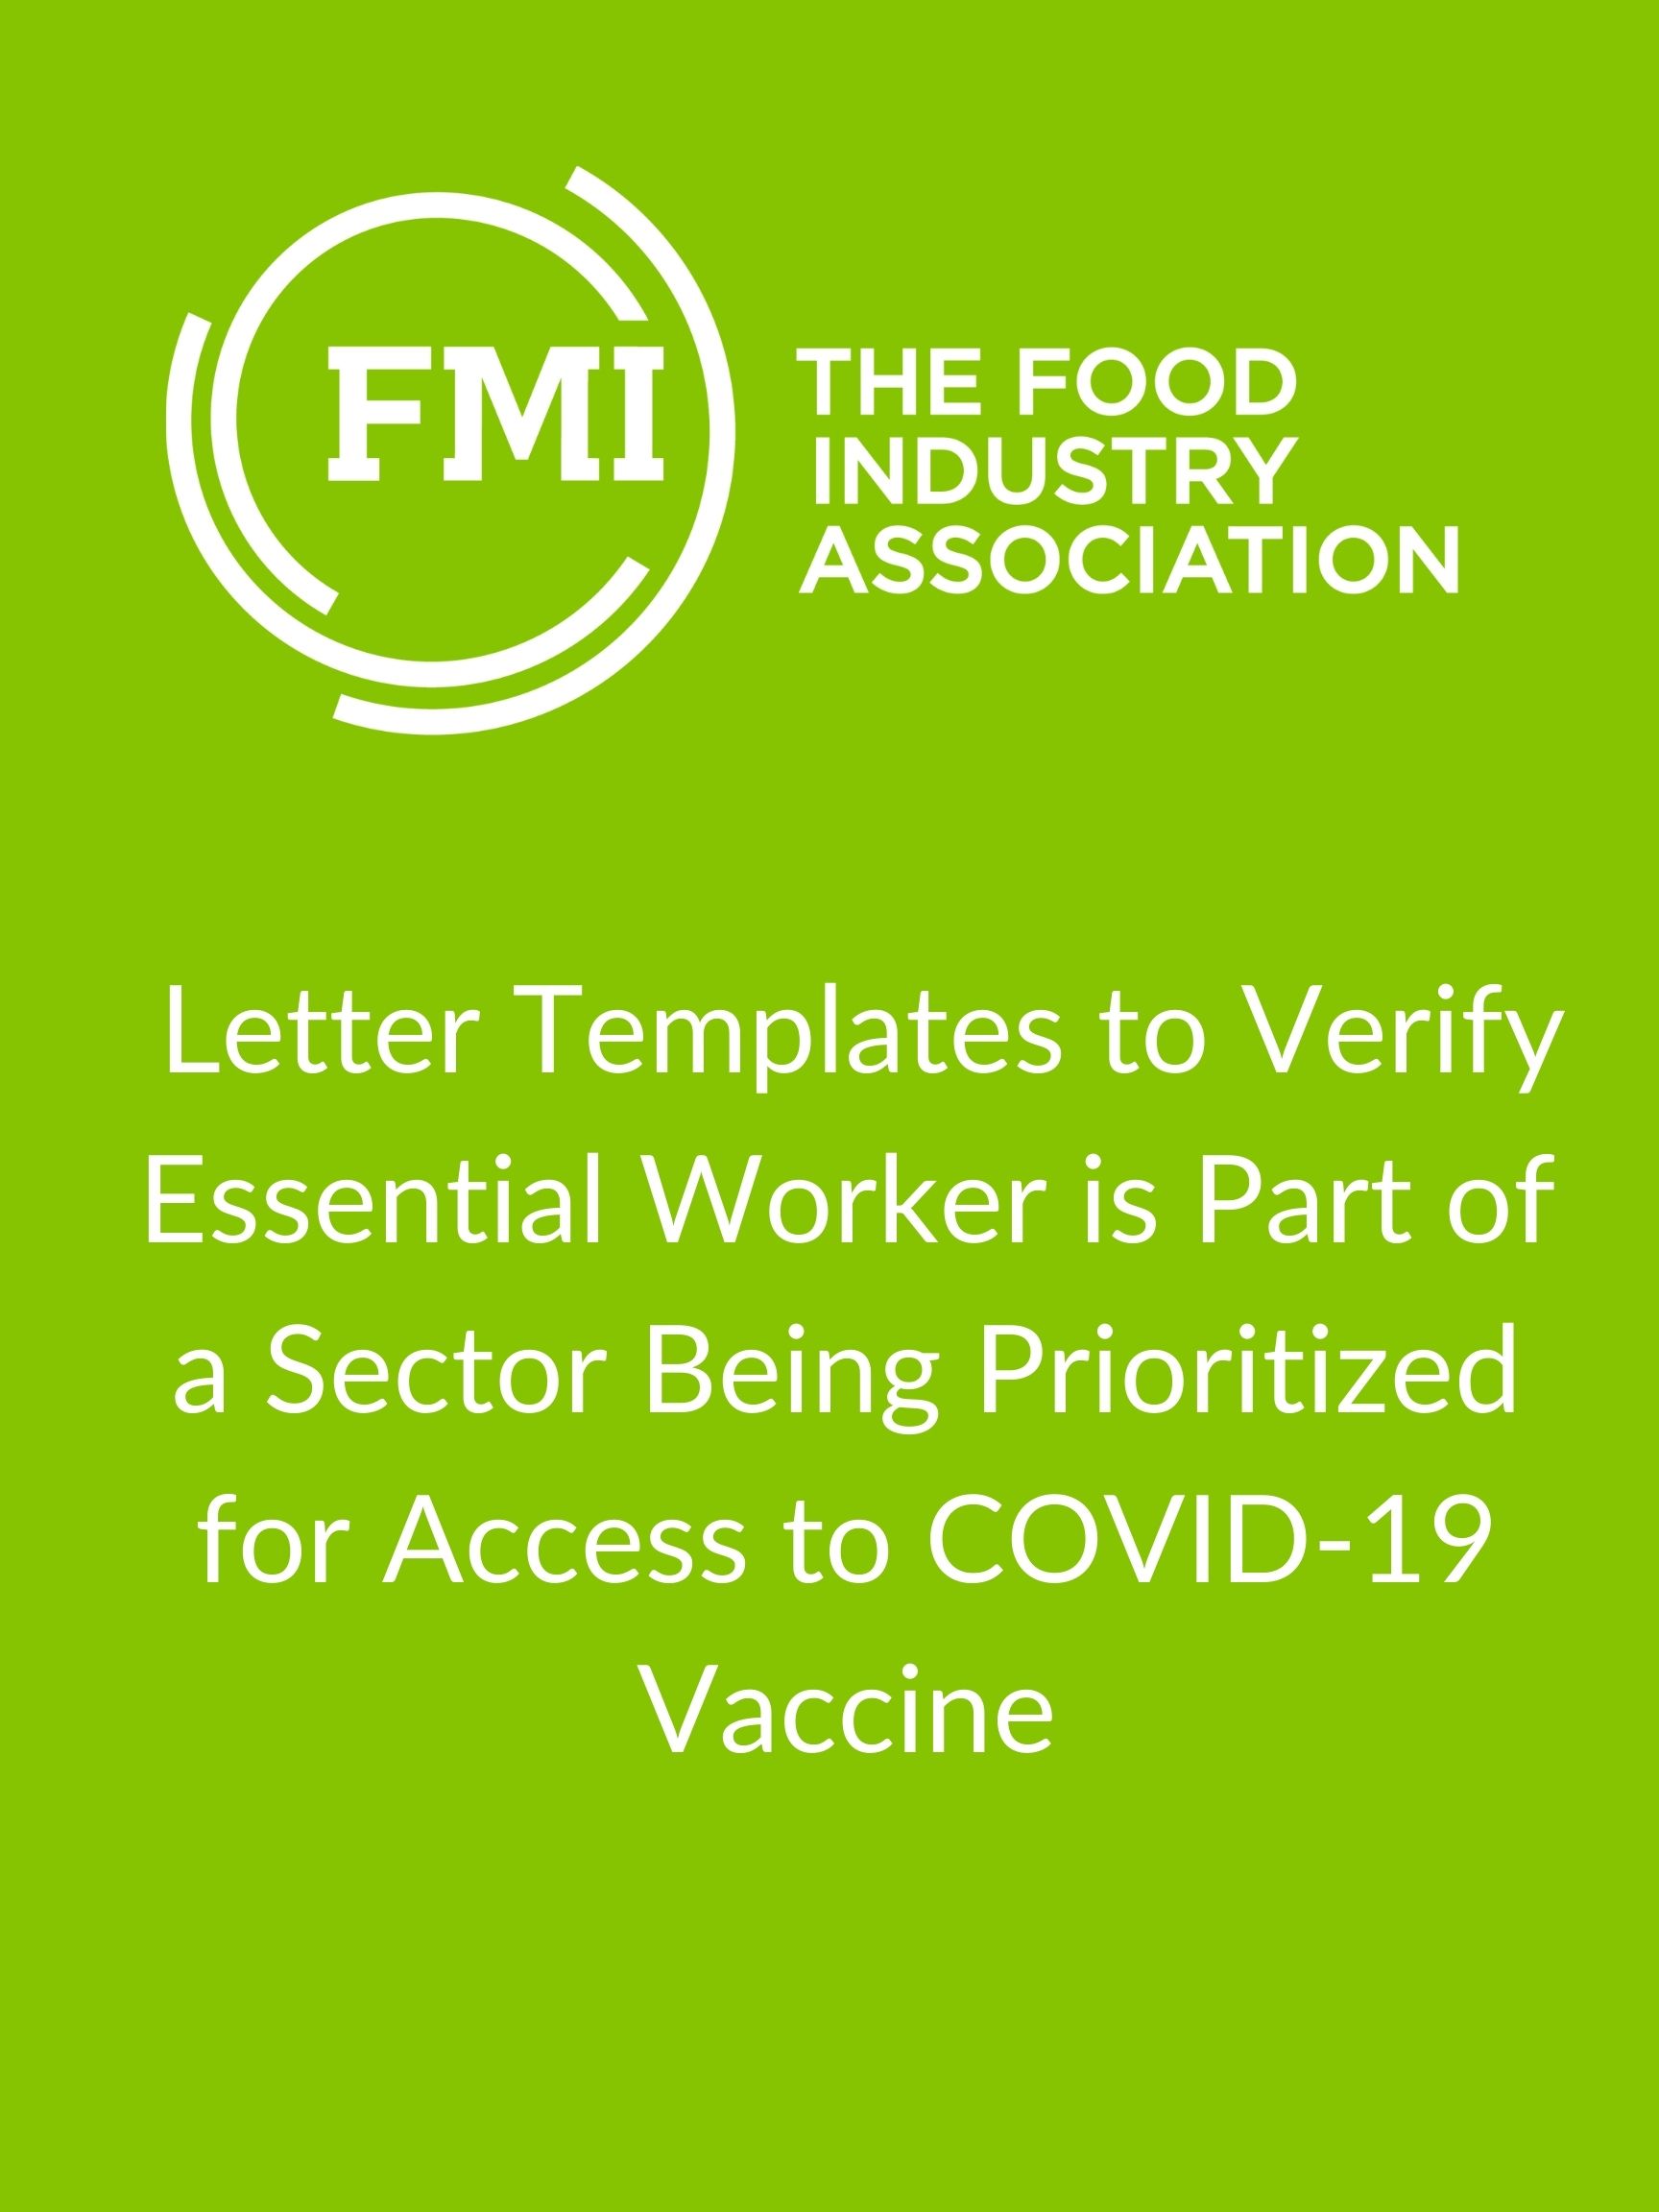 Food and Agriculture Letter Template -- Frontline Essential Worker Entitled to COVID-19 Vaccine Prioritization-6